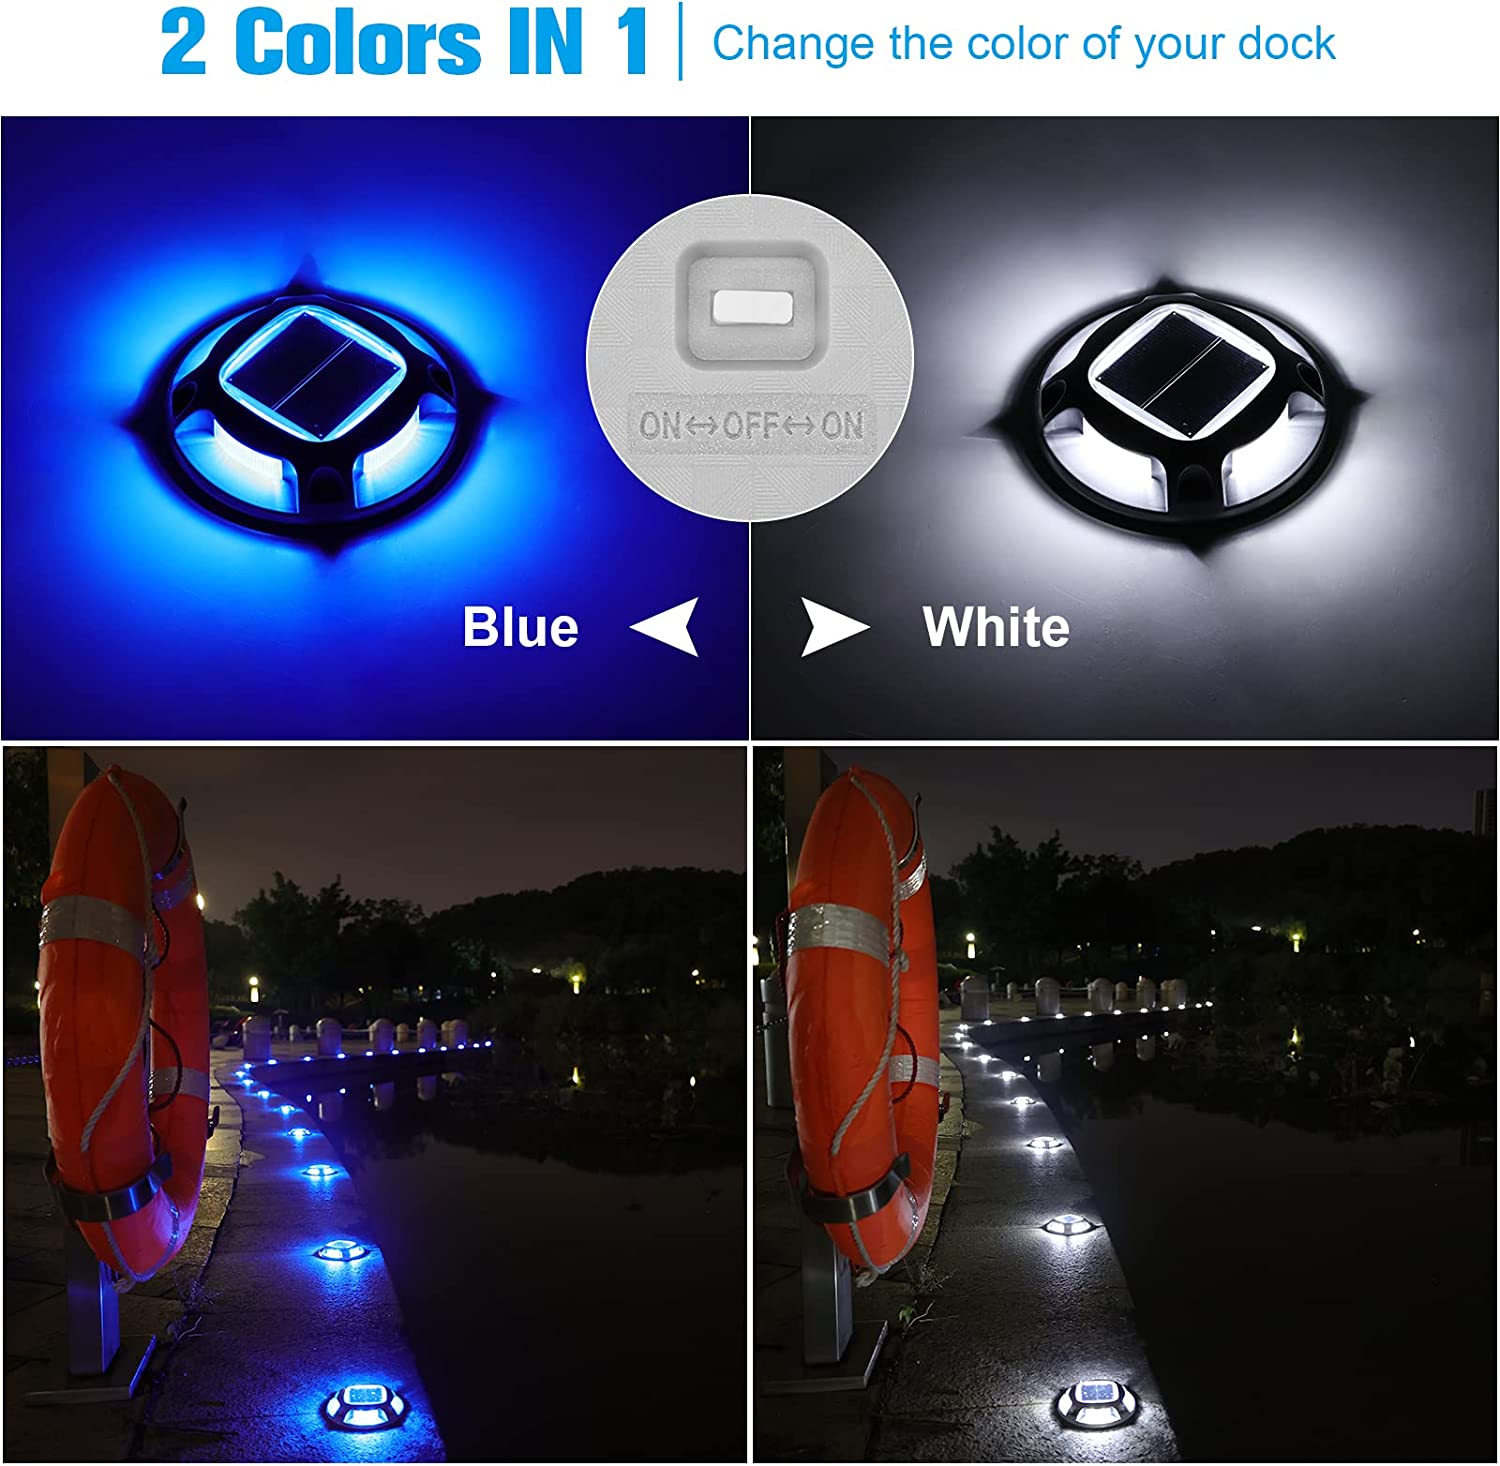 Solar Driveway Lights Dock Marine Lights 4-Pack,2 Colors in 1,Outdoor LED Deck  Lights,Solar Powered Waterproof Driveway Marker Lights for Warning Step  Wireless Sidewalk Pathway (White/Blue)